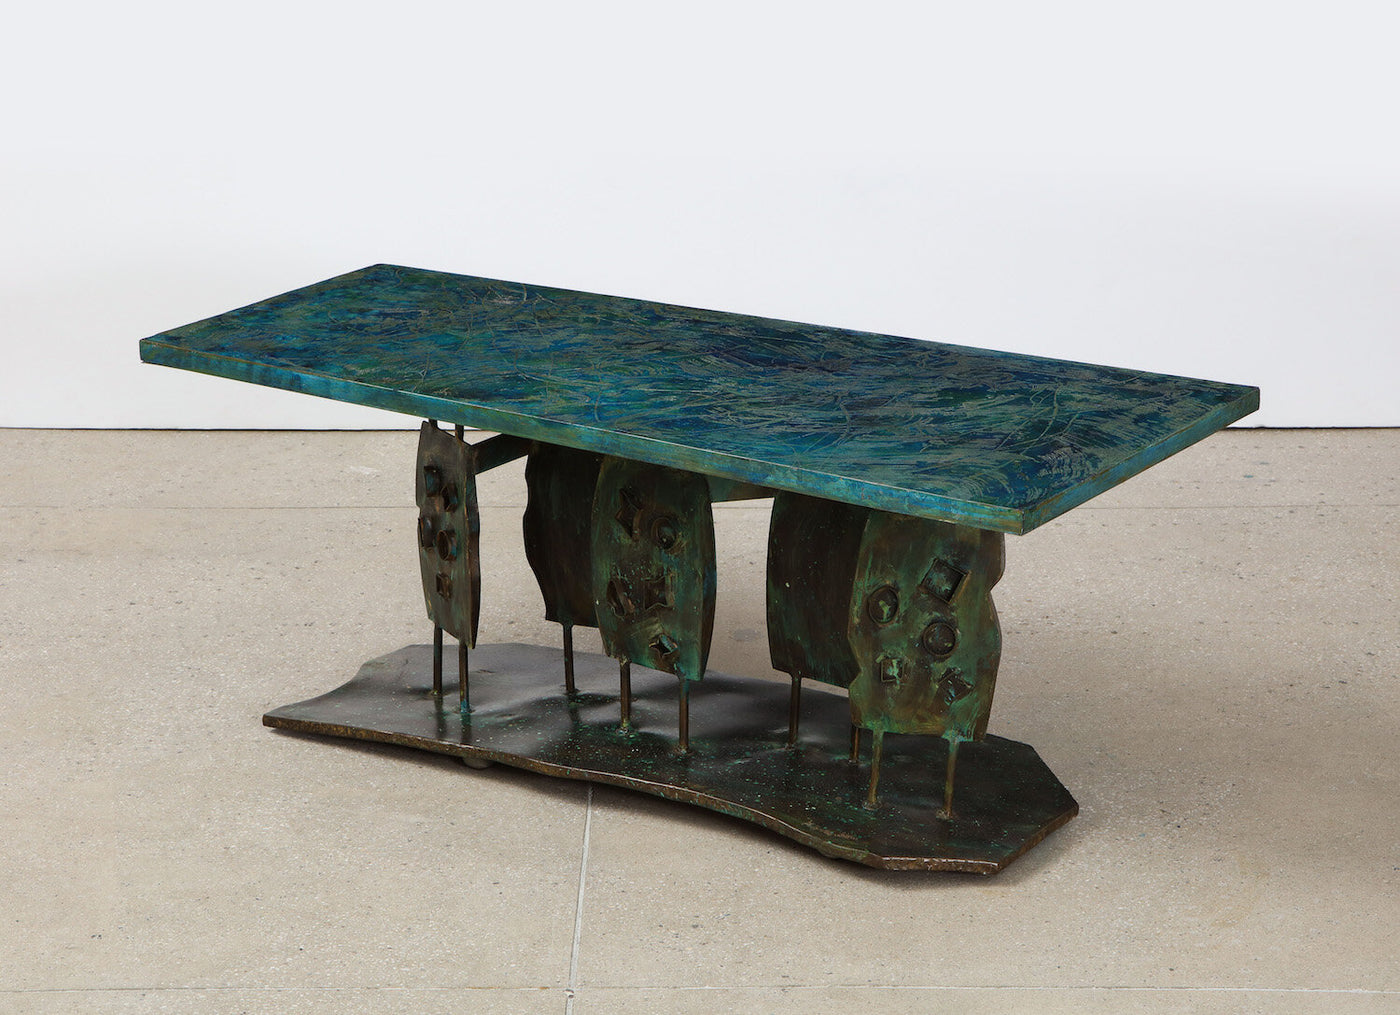 “Dance of the Fauves” Low Table by Philip & Kelvin LaVerne